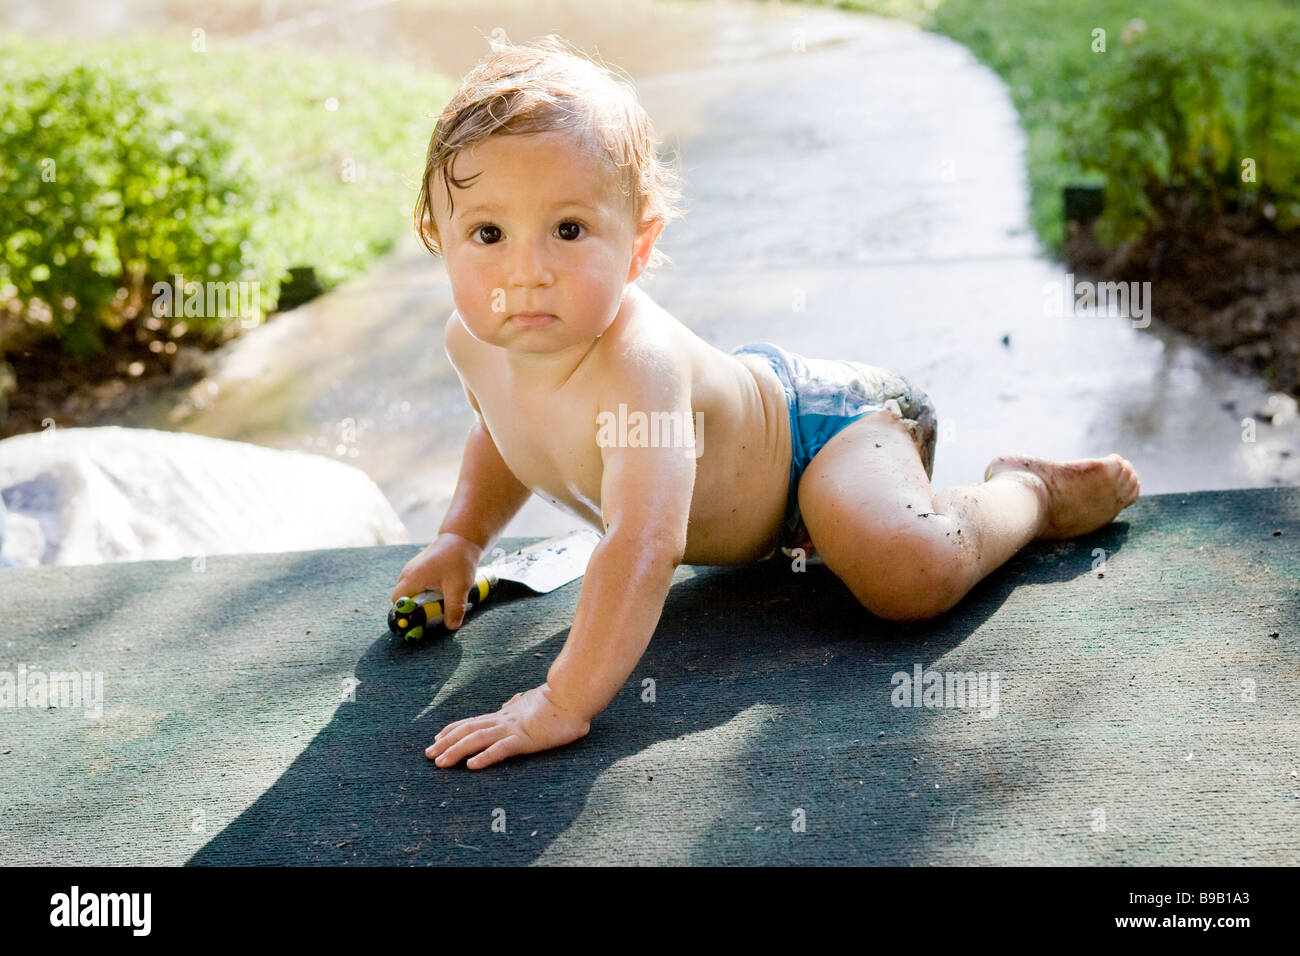 A wet diaper clad one year old boy looks at the viewer holding a small  gardening shovel Stock Photo - Alamy